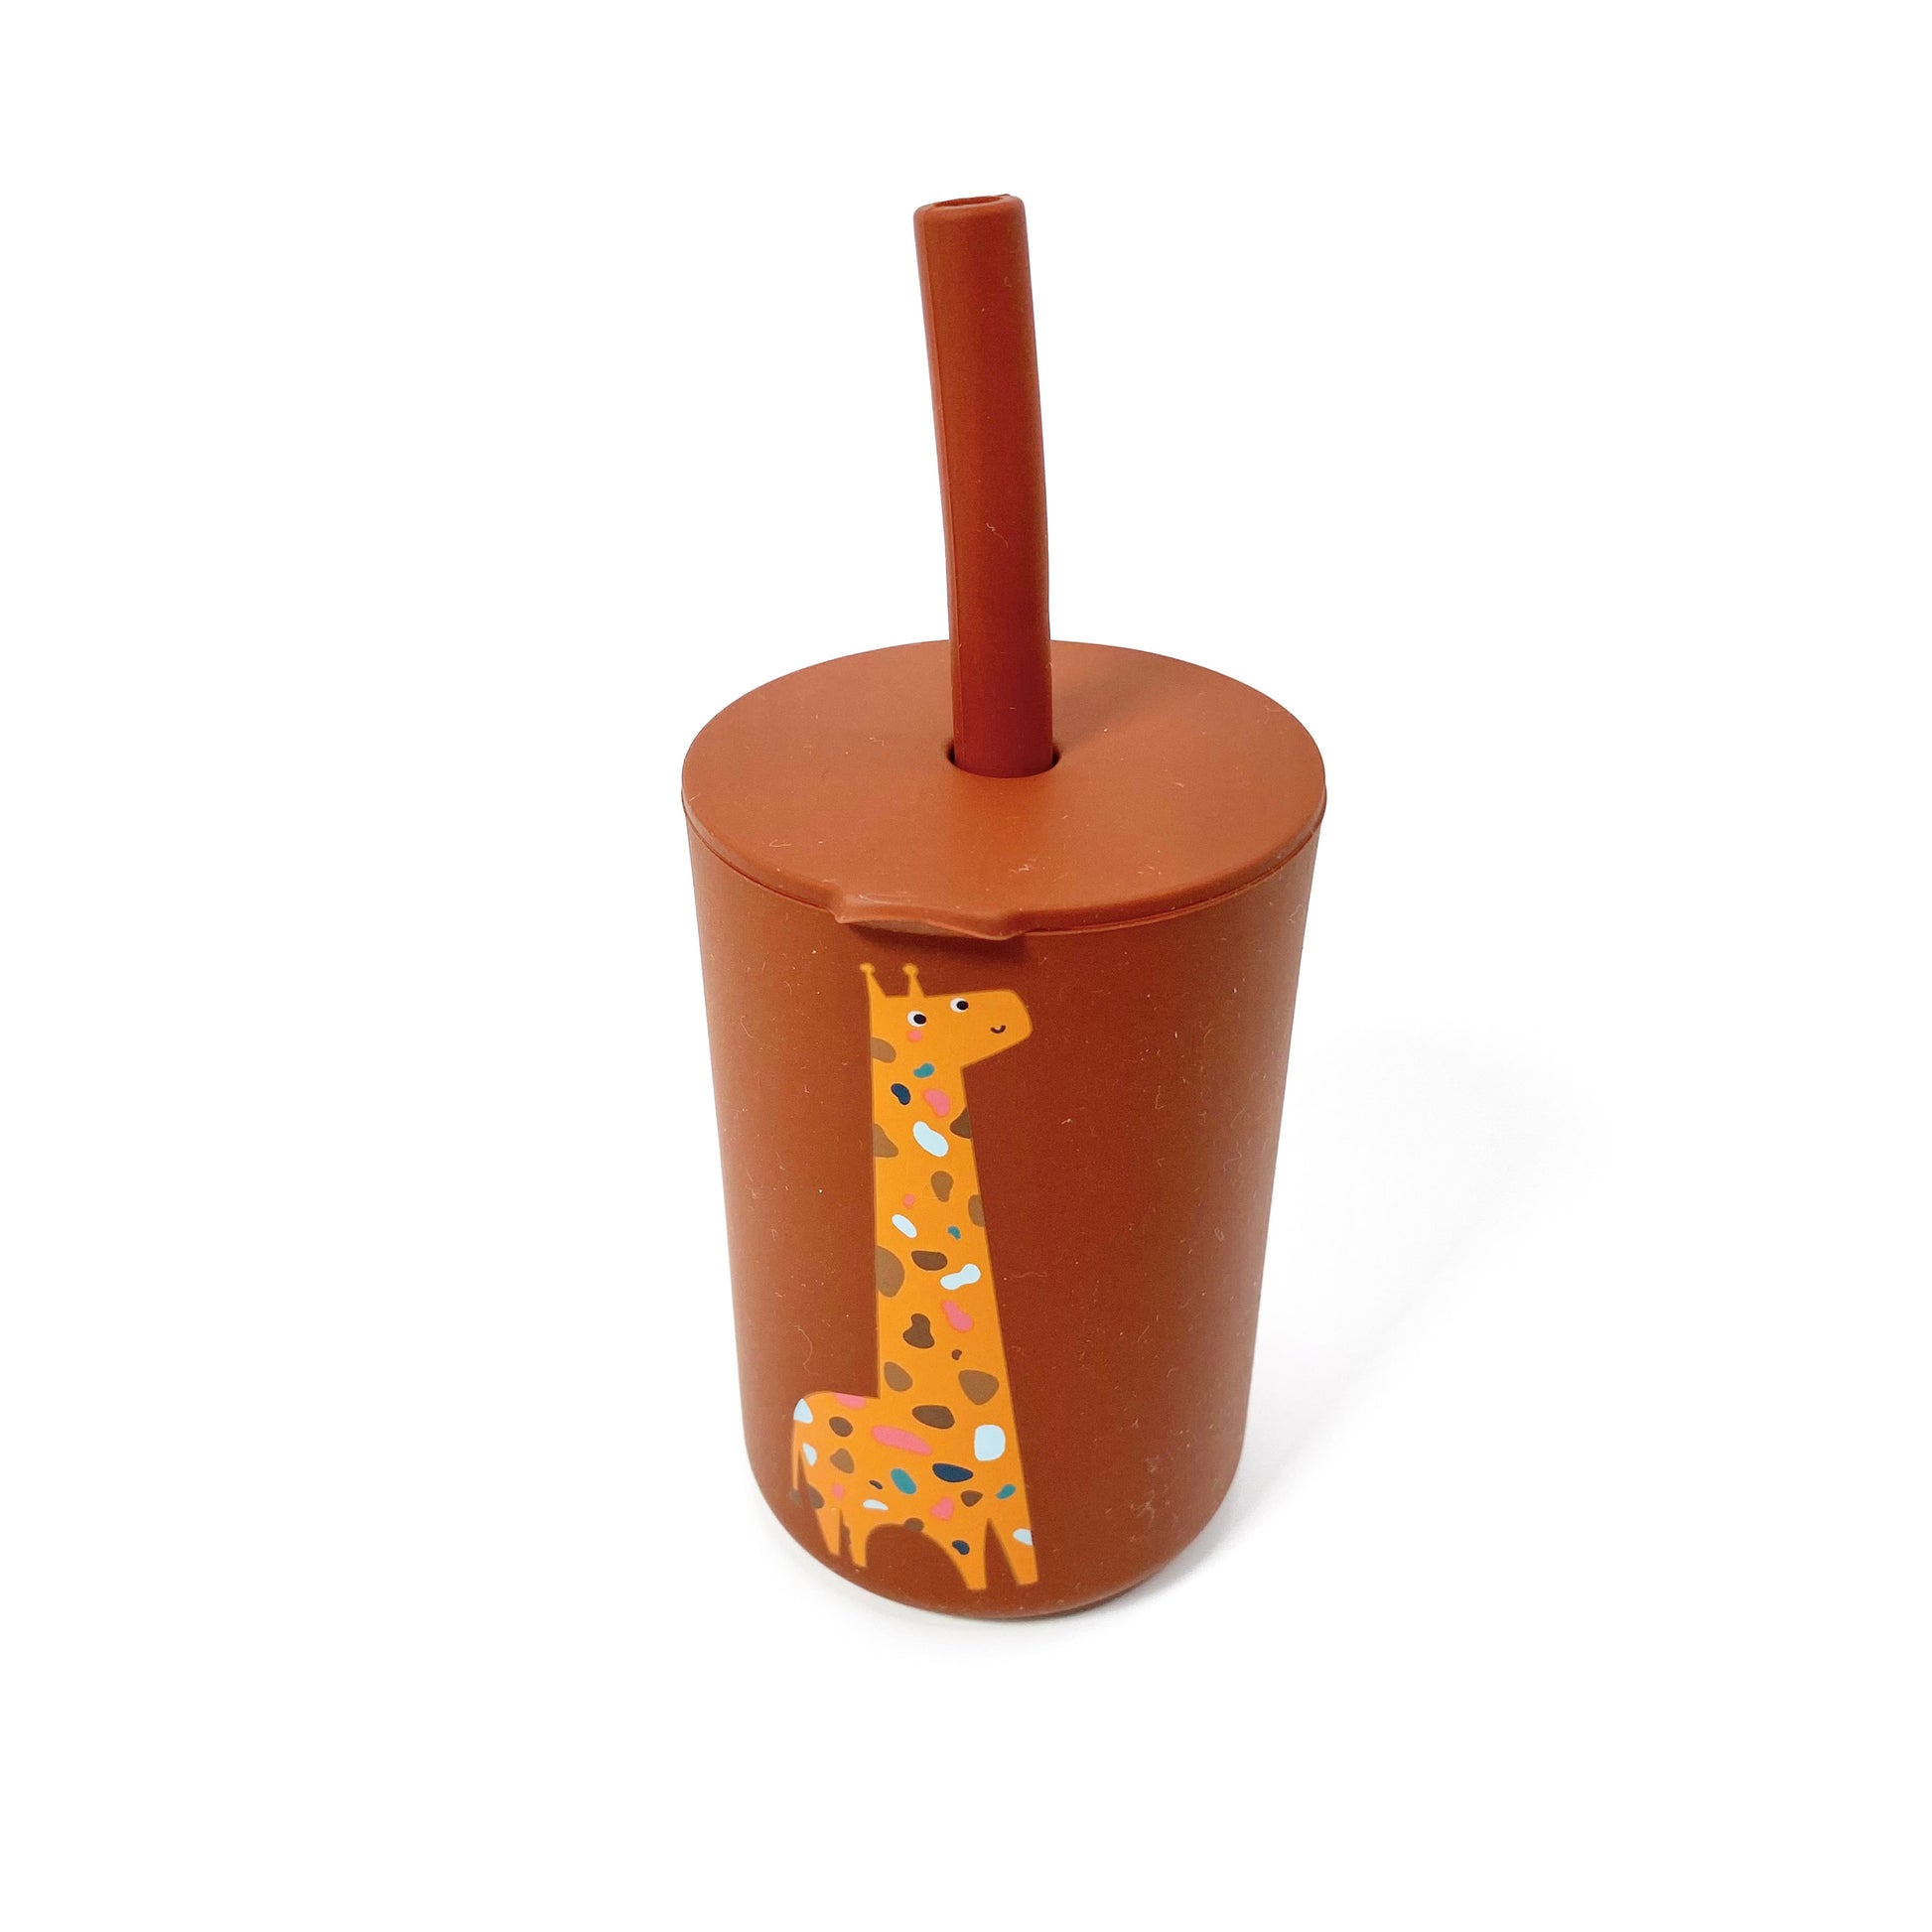 A children’s brown silicone drinking cup, with matching lid and straw, featuring a giraffe design. The image shows the cup with lid and straw attached.